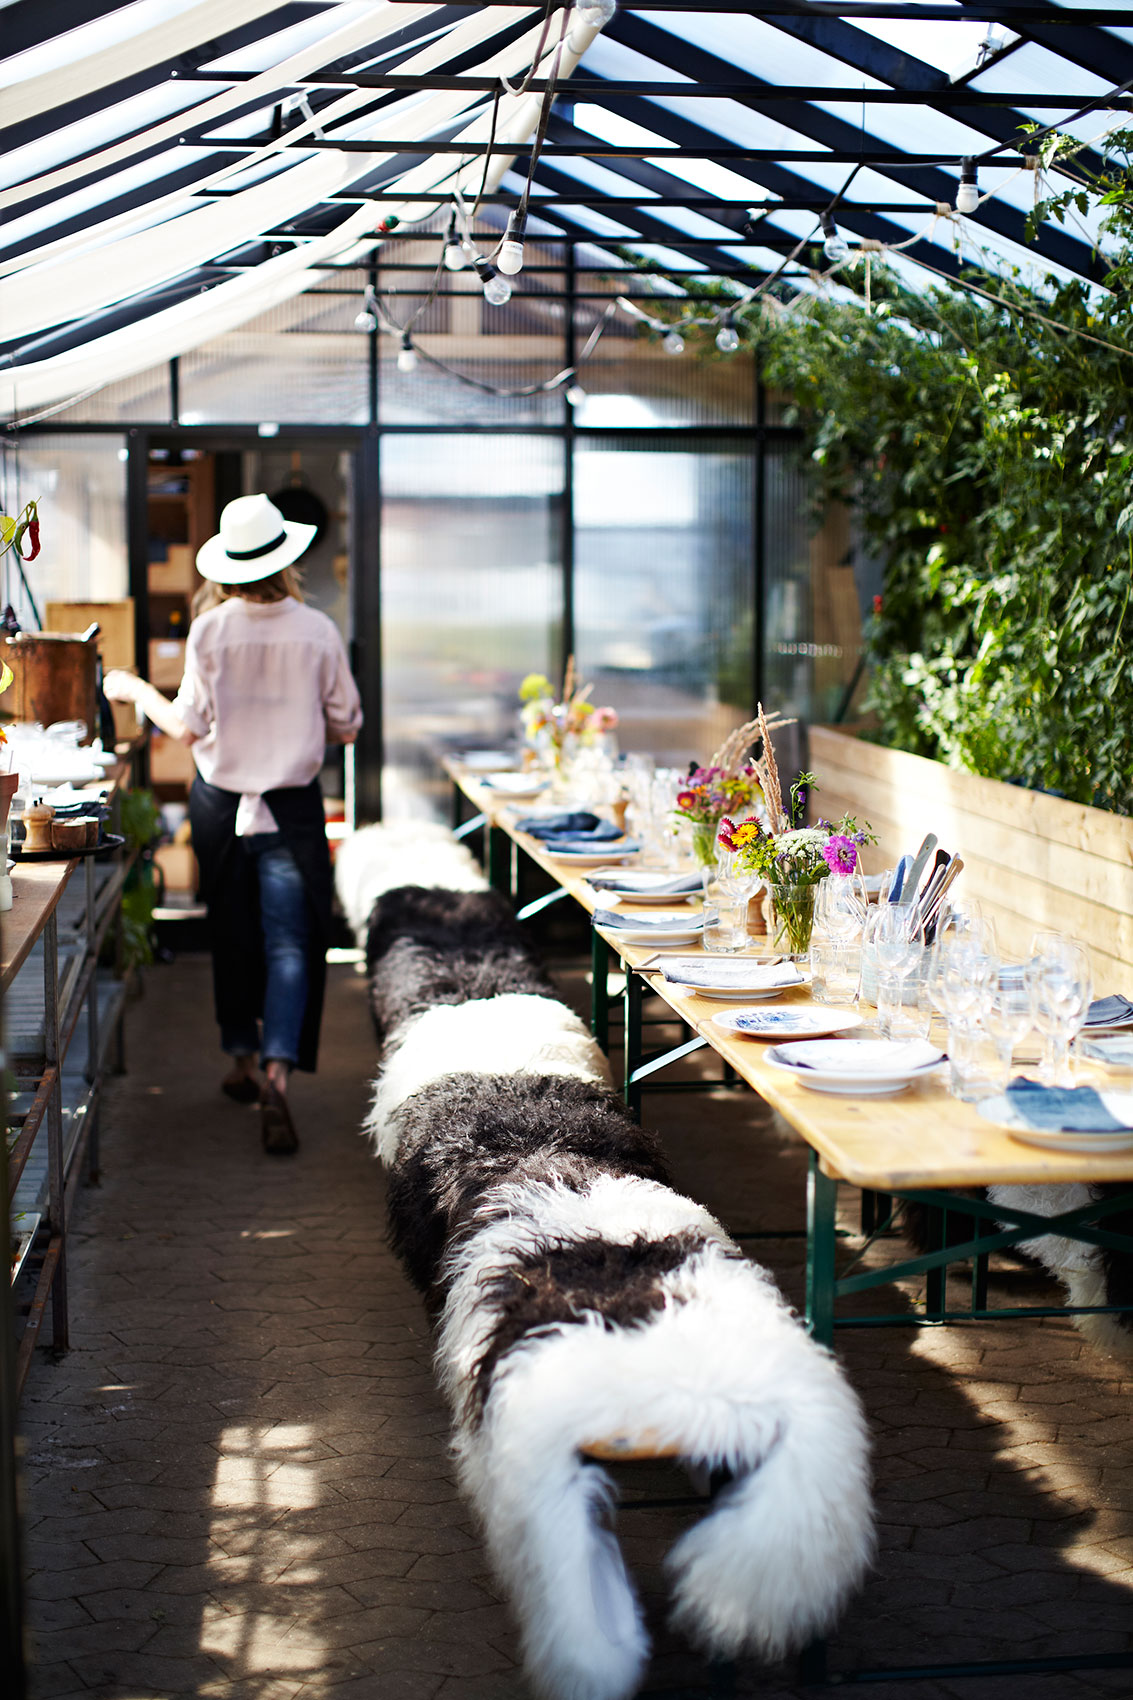 Stedsans in the Woods • Setting Tables for Lunch in Steel-Framed Glasshouse • Lifestyle & Editorial Food Photography